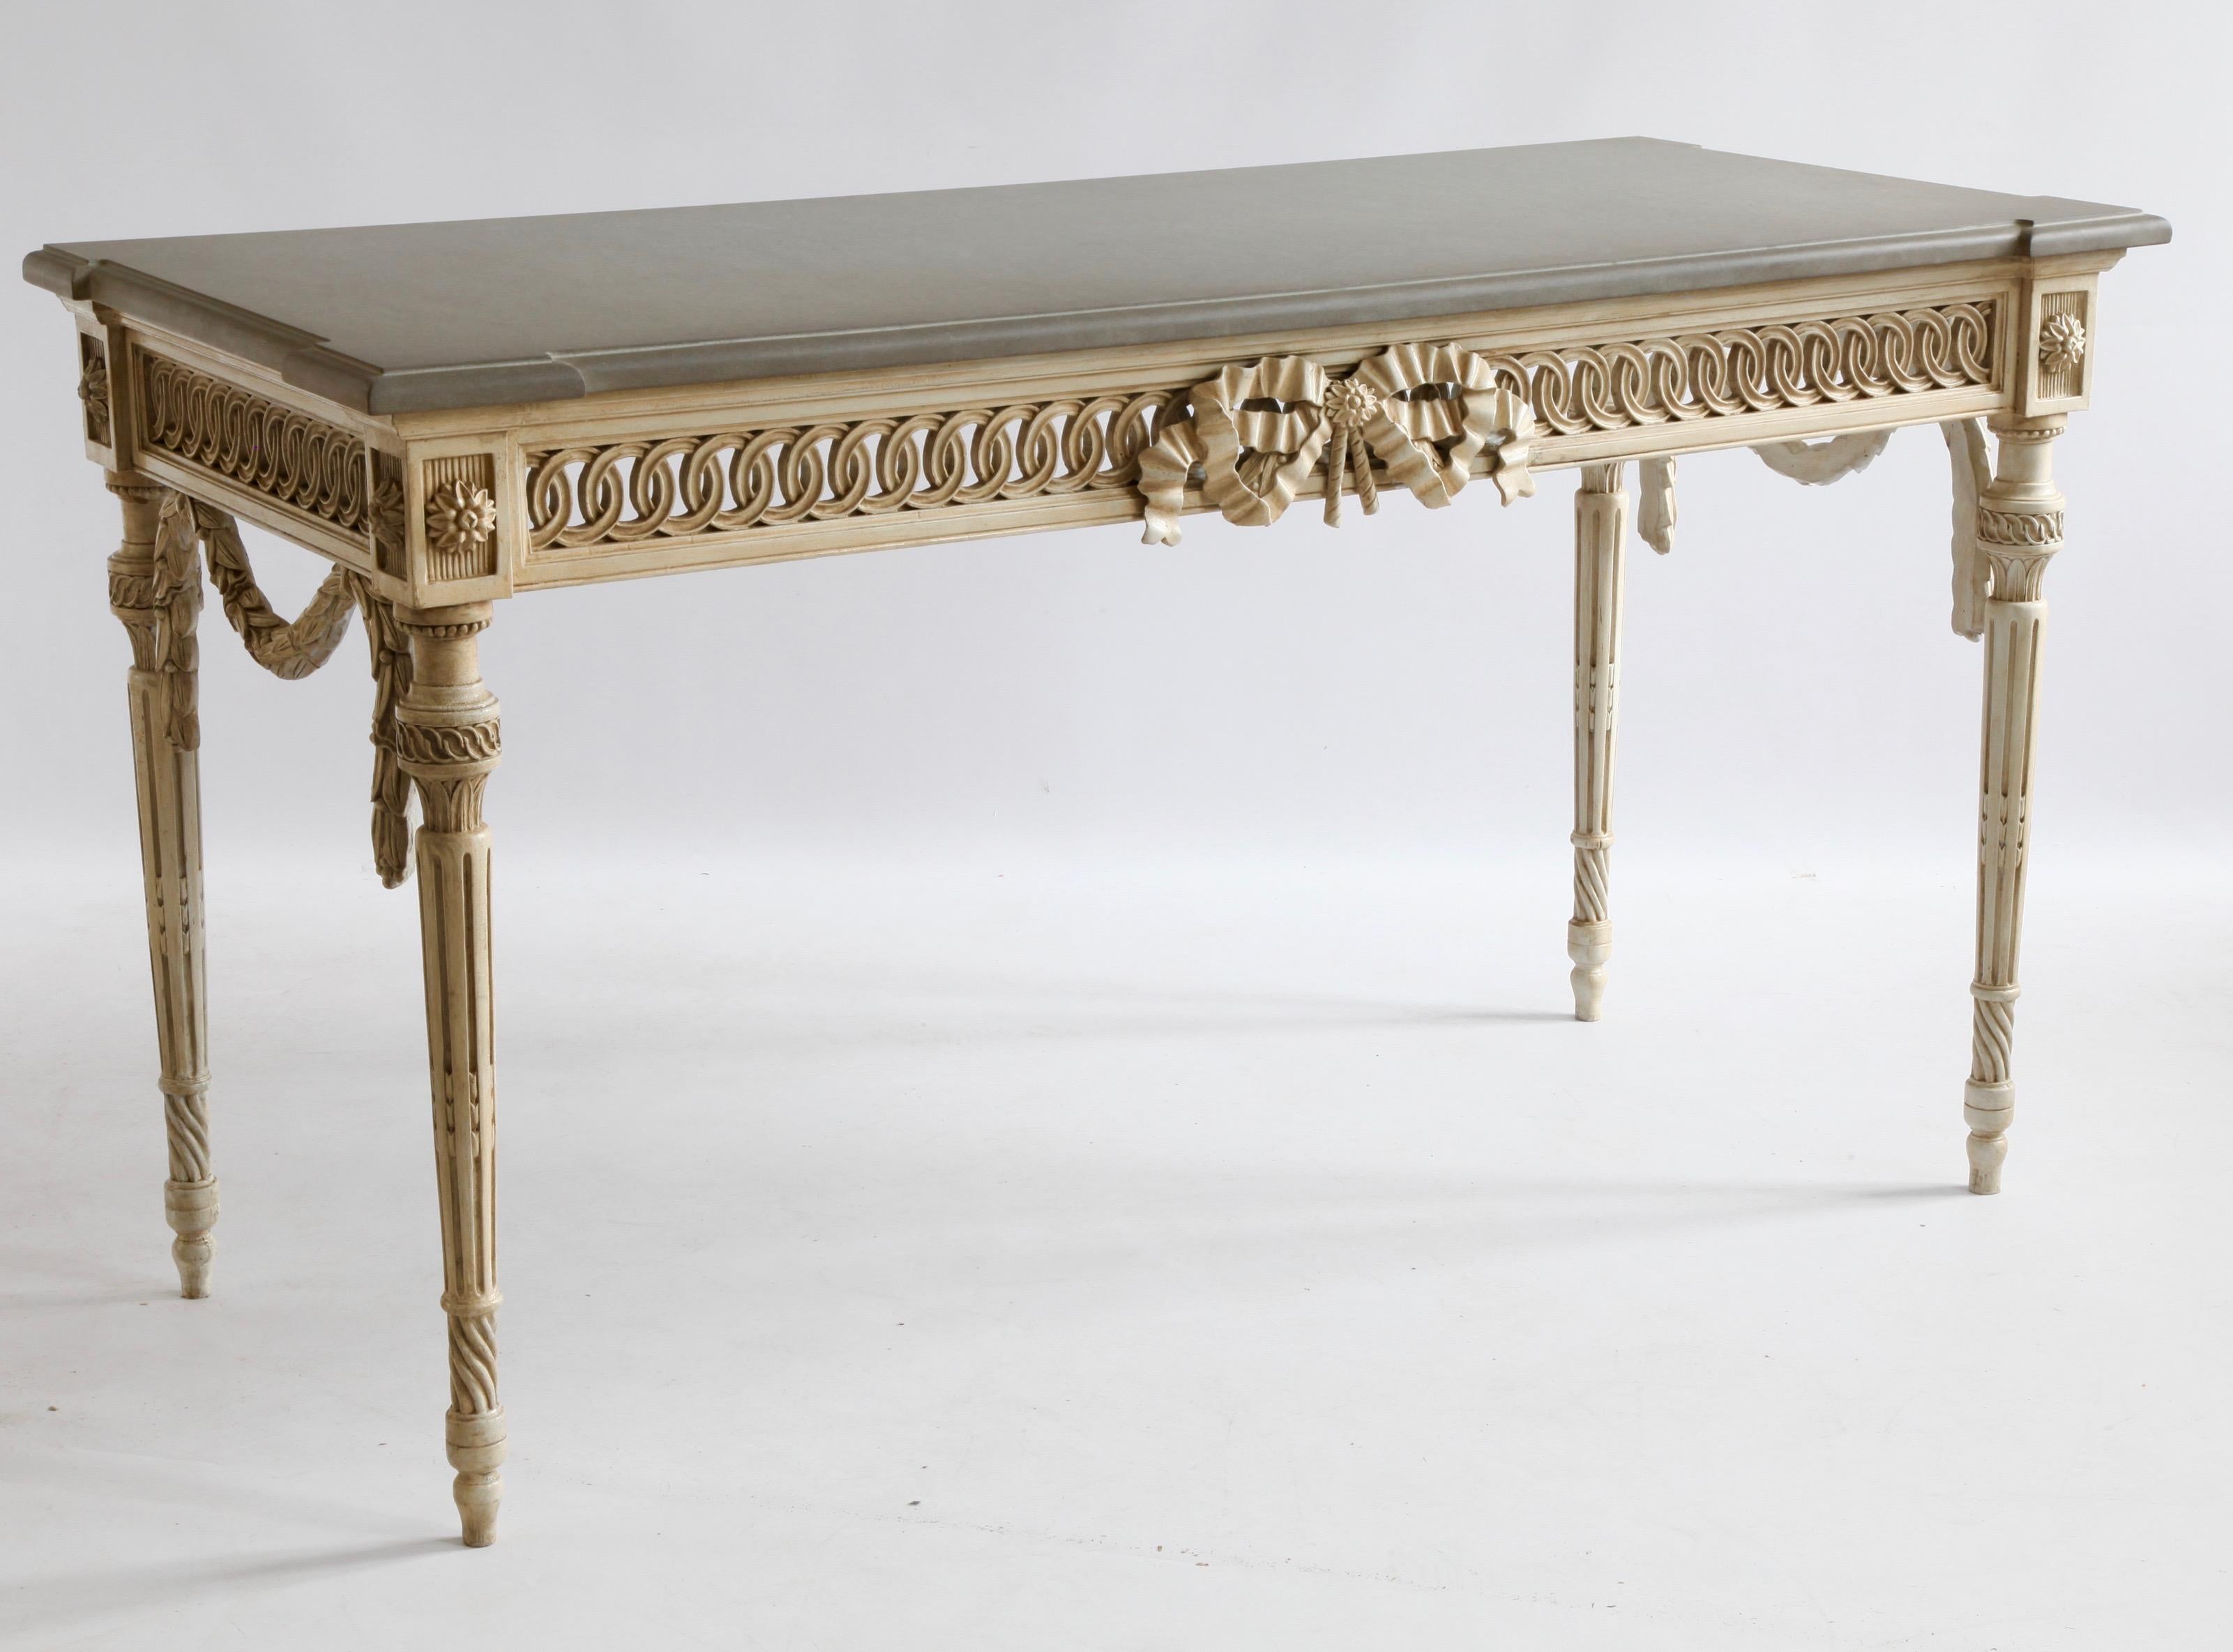 A freestanding console table hand carved in the Louis XVI style with fine, period detailing and hand finished in an aged, French grey patina created using traditional methods and materials. The piece is complemented with a grey stone, beveled top